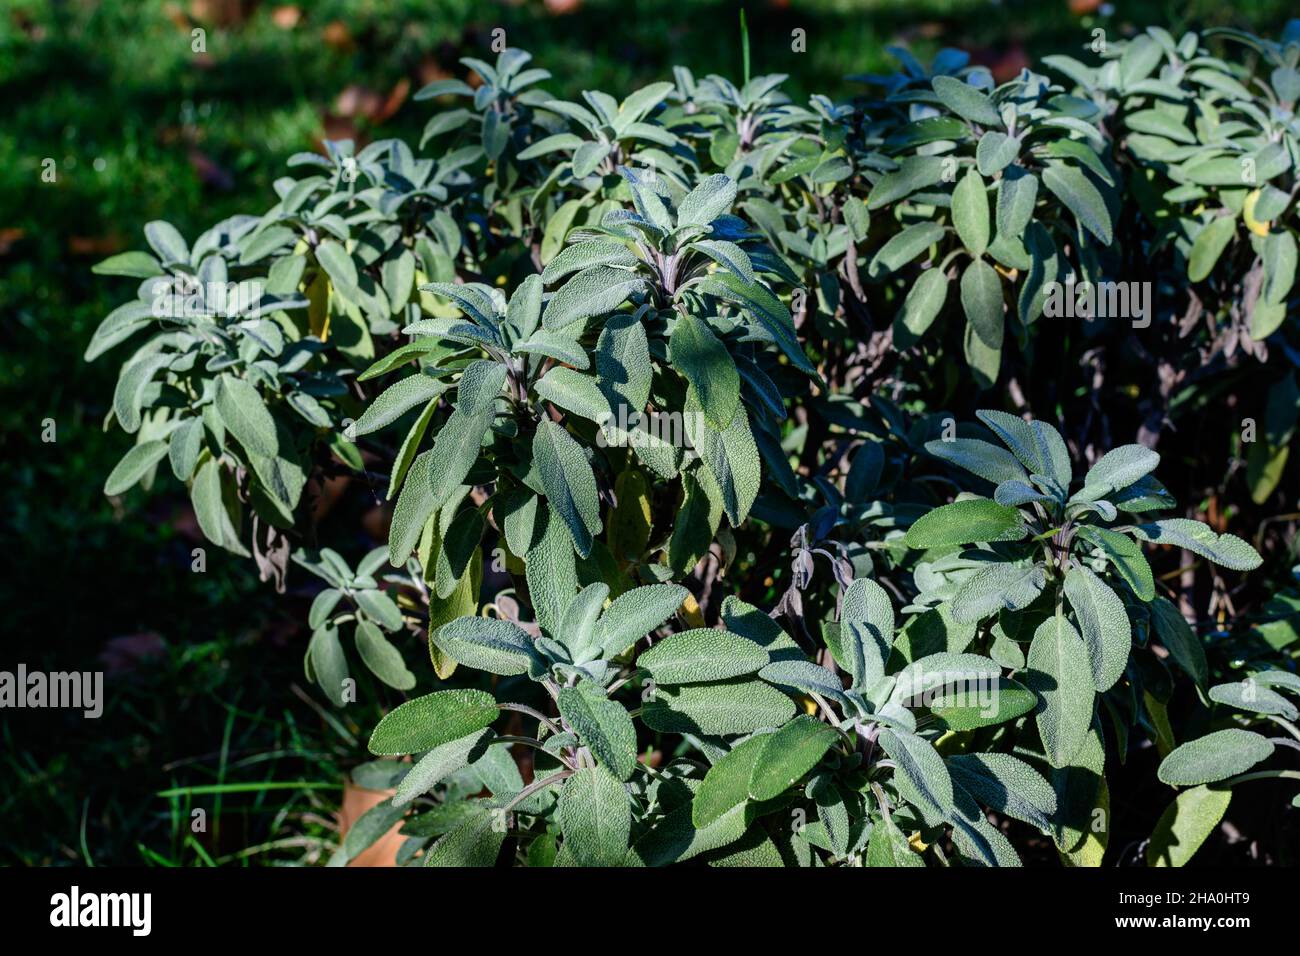 Monochrome background with a large evergreen leaves of Salvia officinalis shrub, known as common or culinary sage in a garden in a sunny autumn day Stock Photo